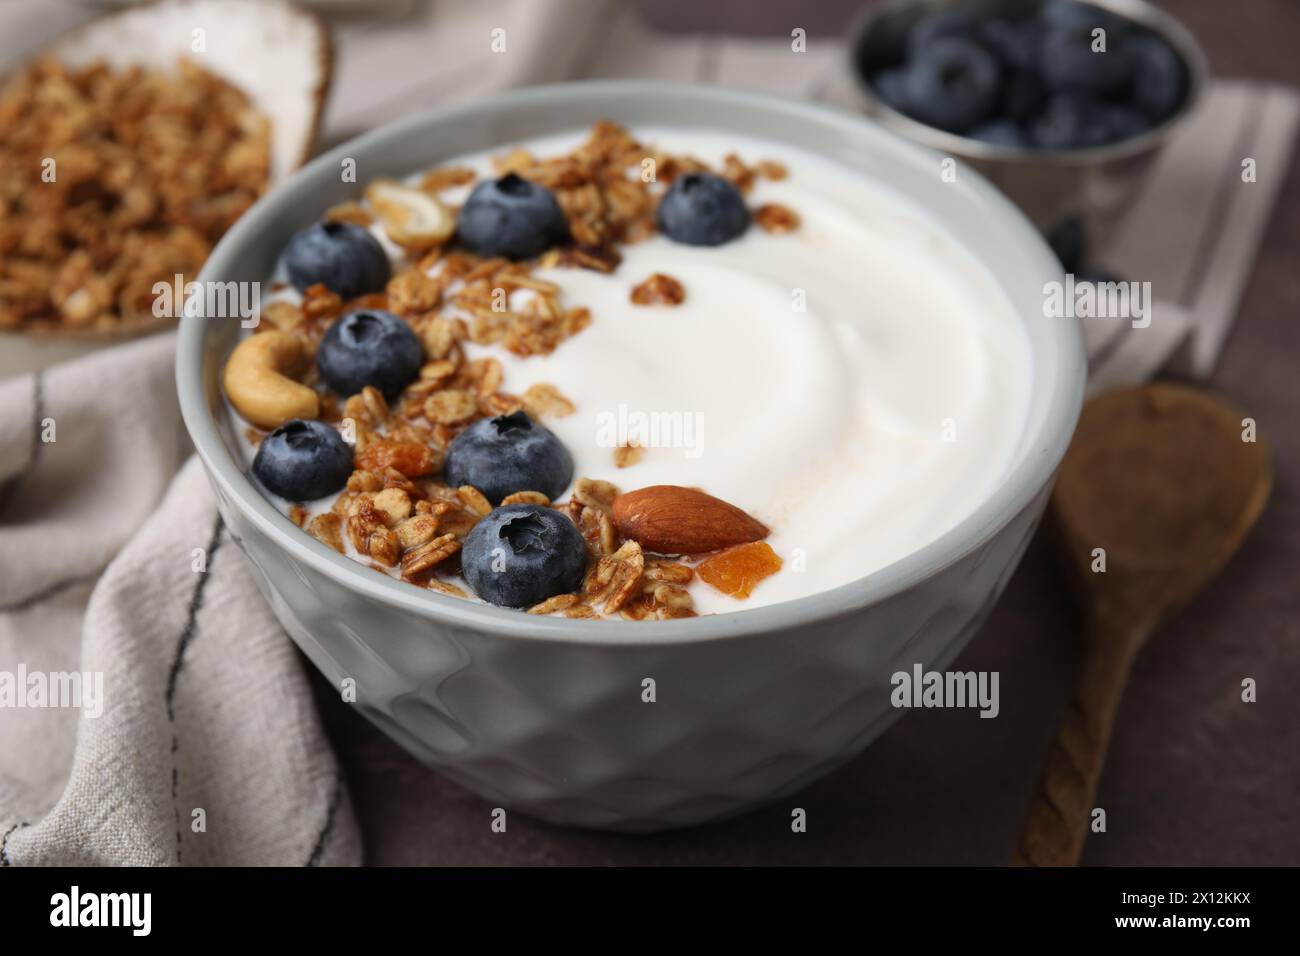 Bowl with yogurt, blueberries and granola on grey table, closeup Stock Photo